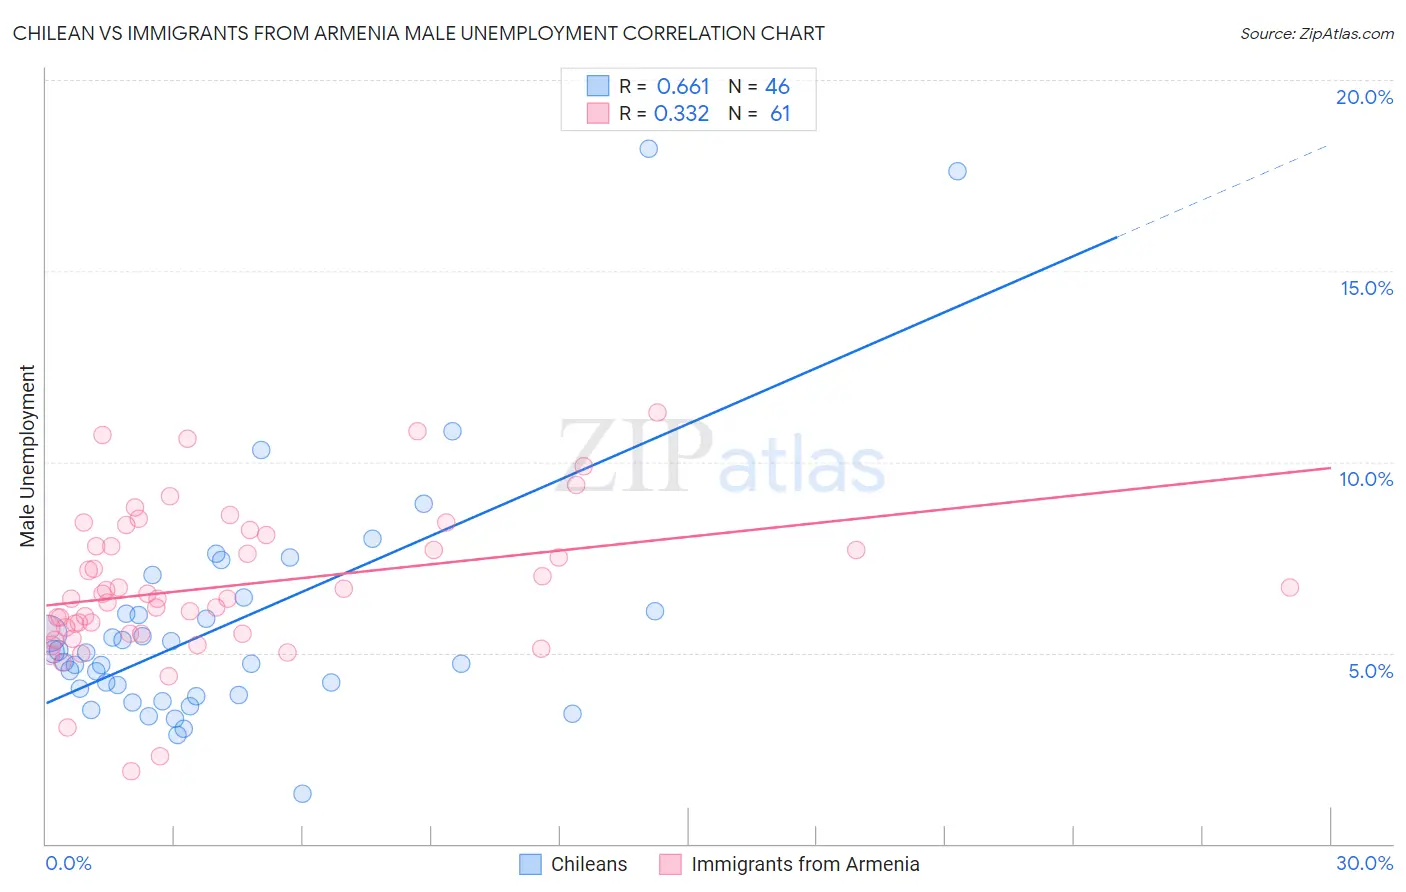 Chilean vs Immigrants from Armenia Male Unemployment